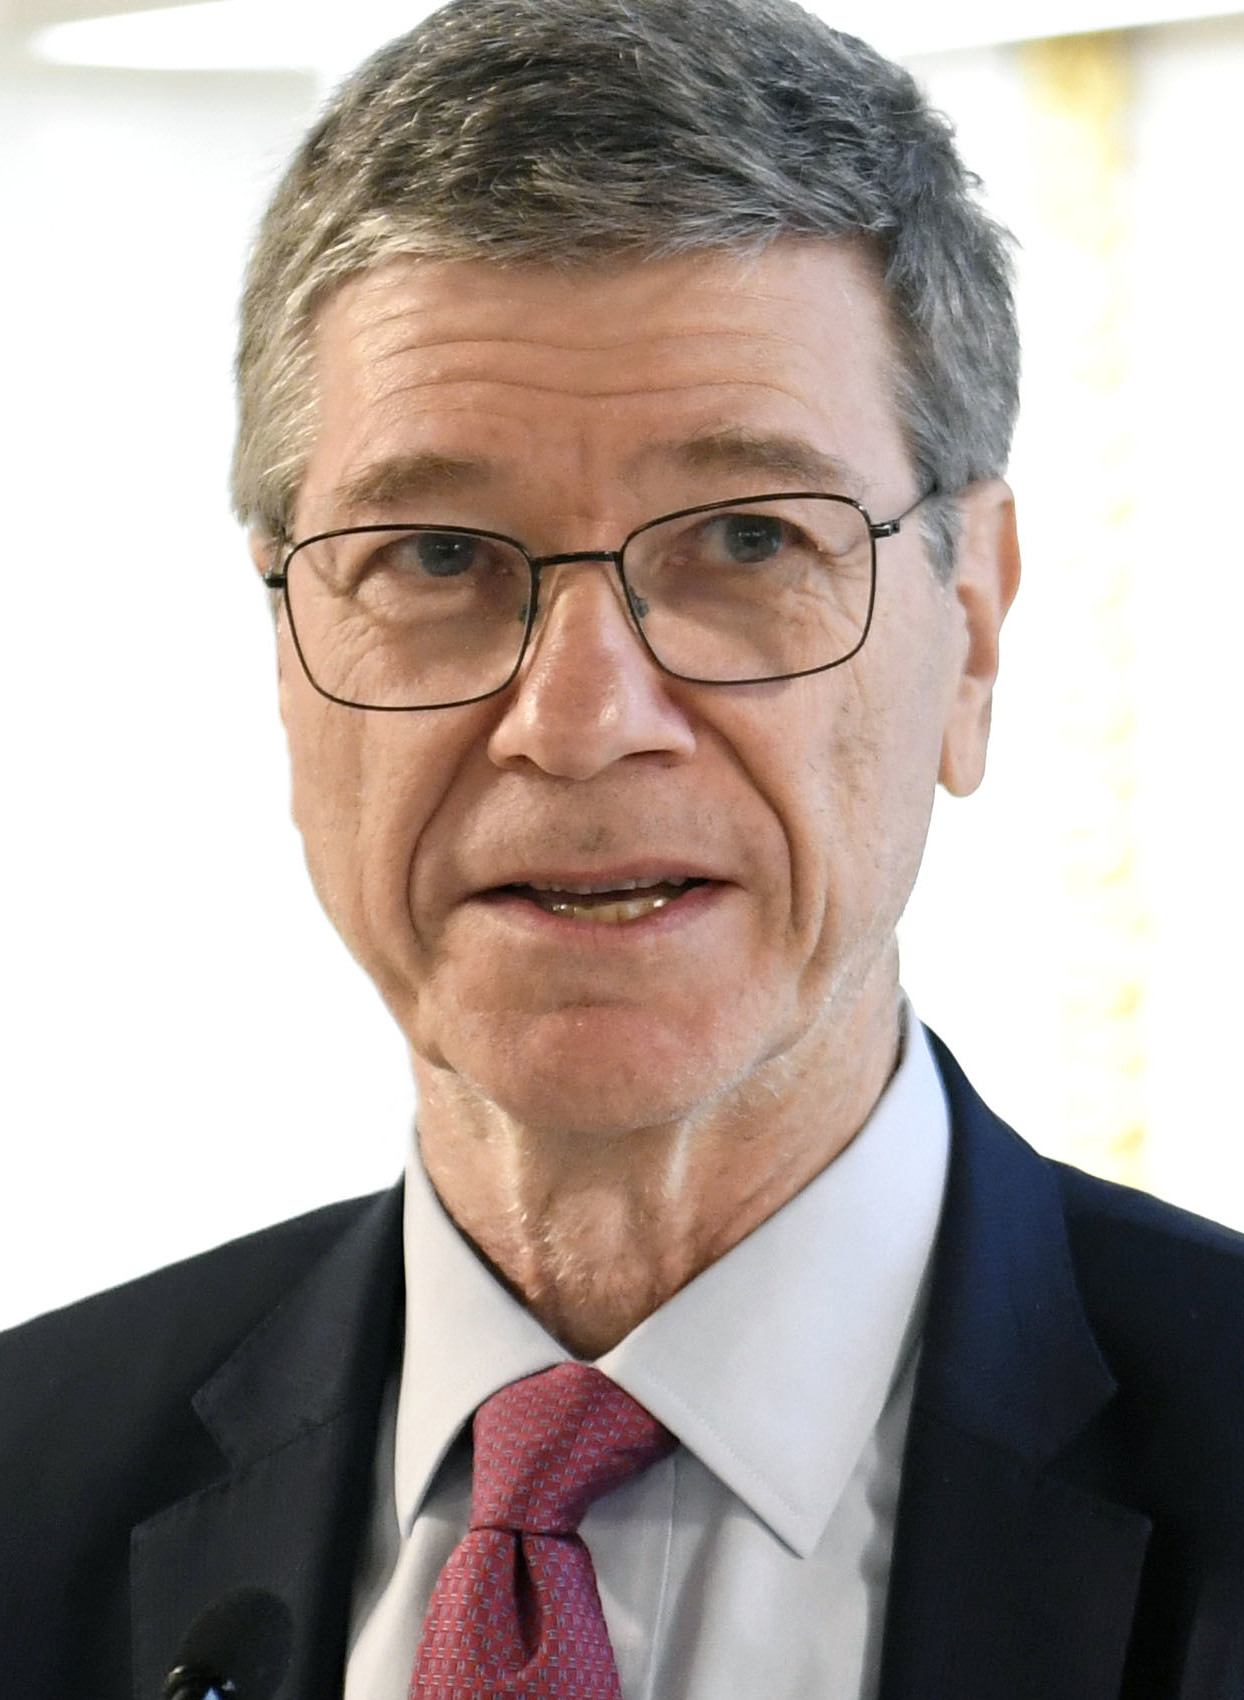 Sachs in 2019